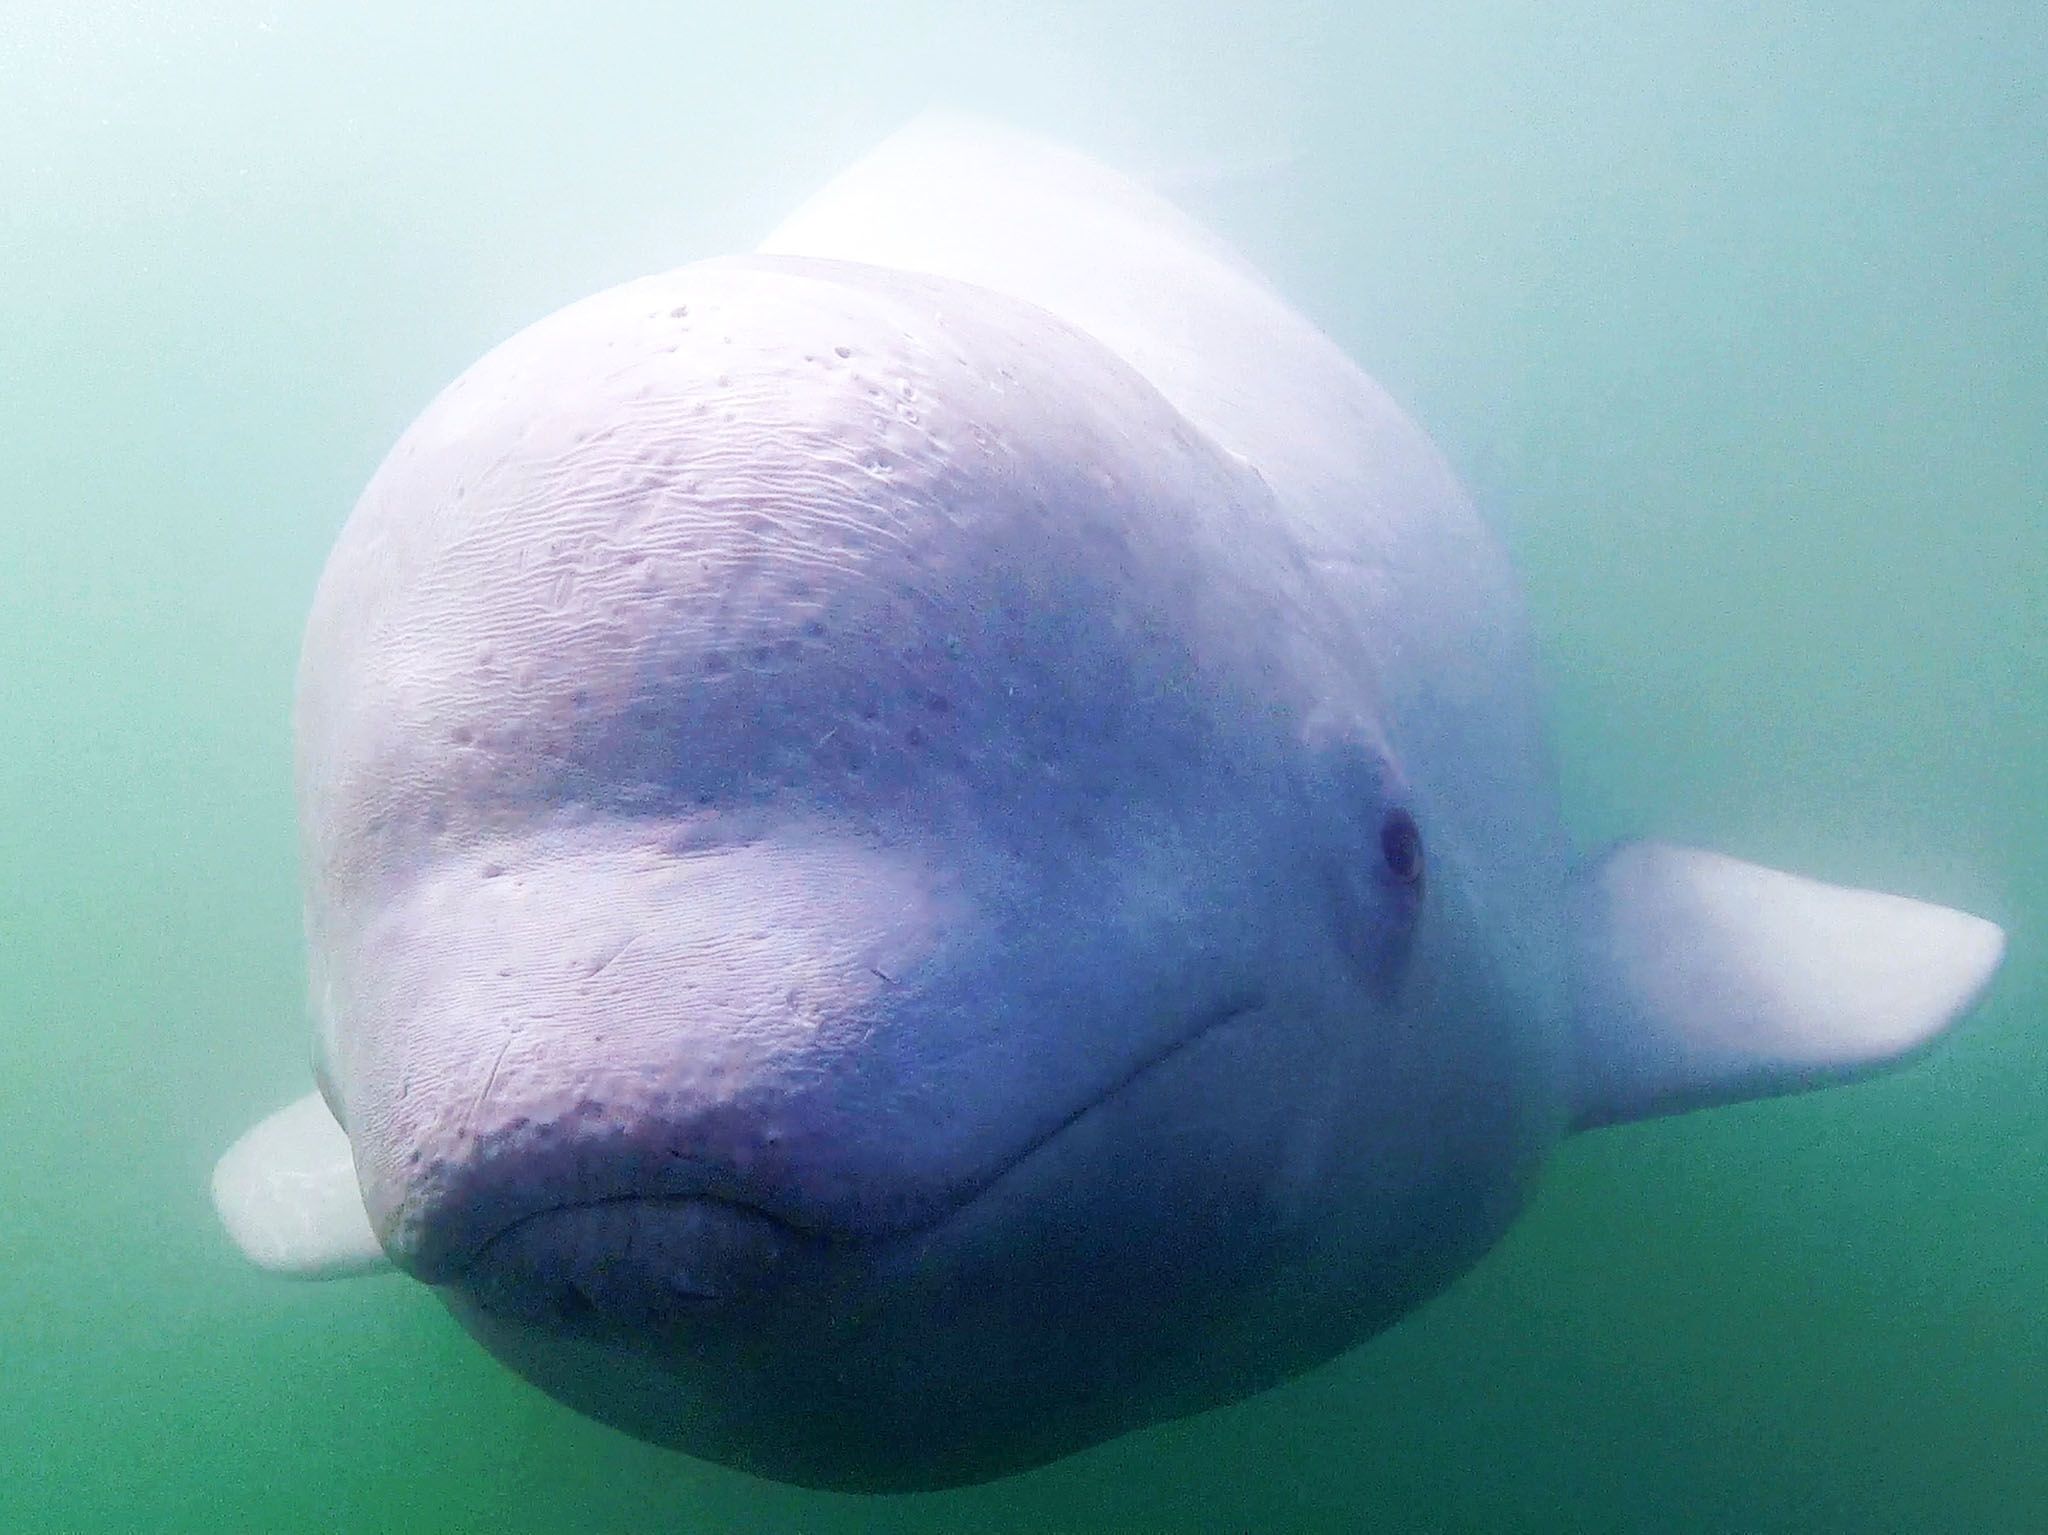 Canada: A young beluga swims in the St. Lawrence River, near the town of Tadoussac, Quebec. This... [Photo of the day - March 2017]